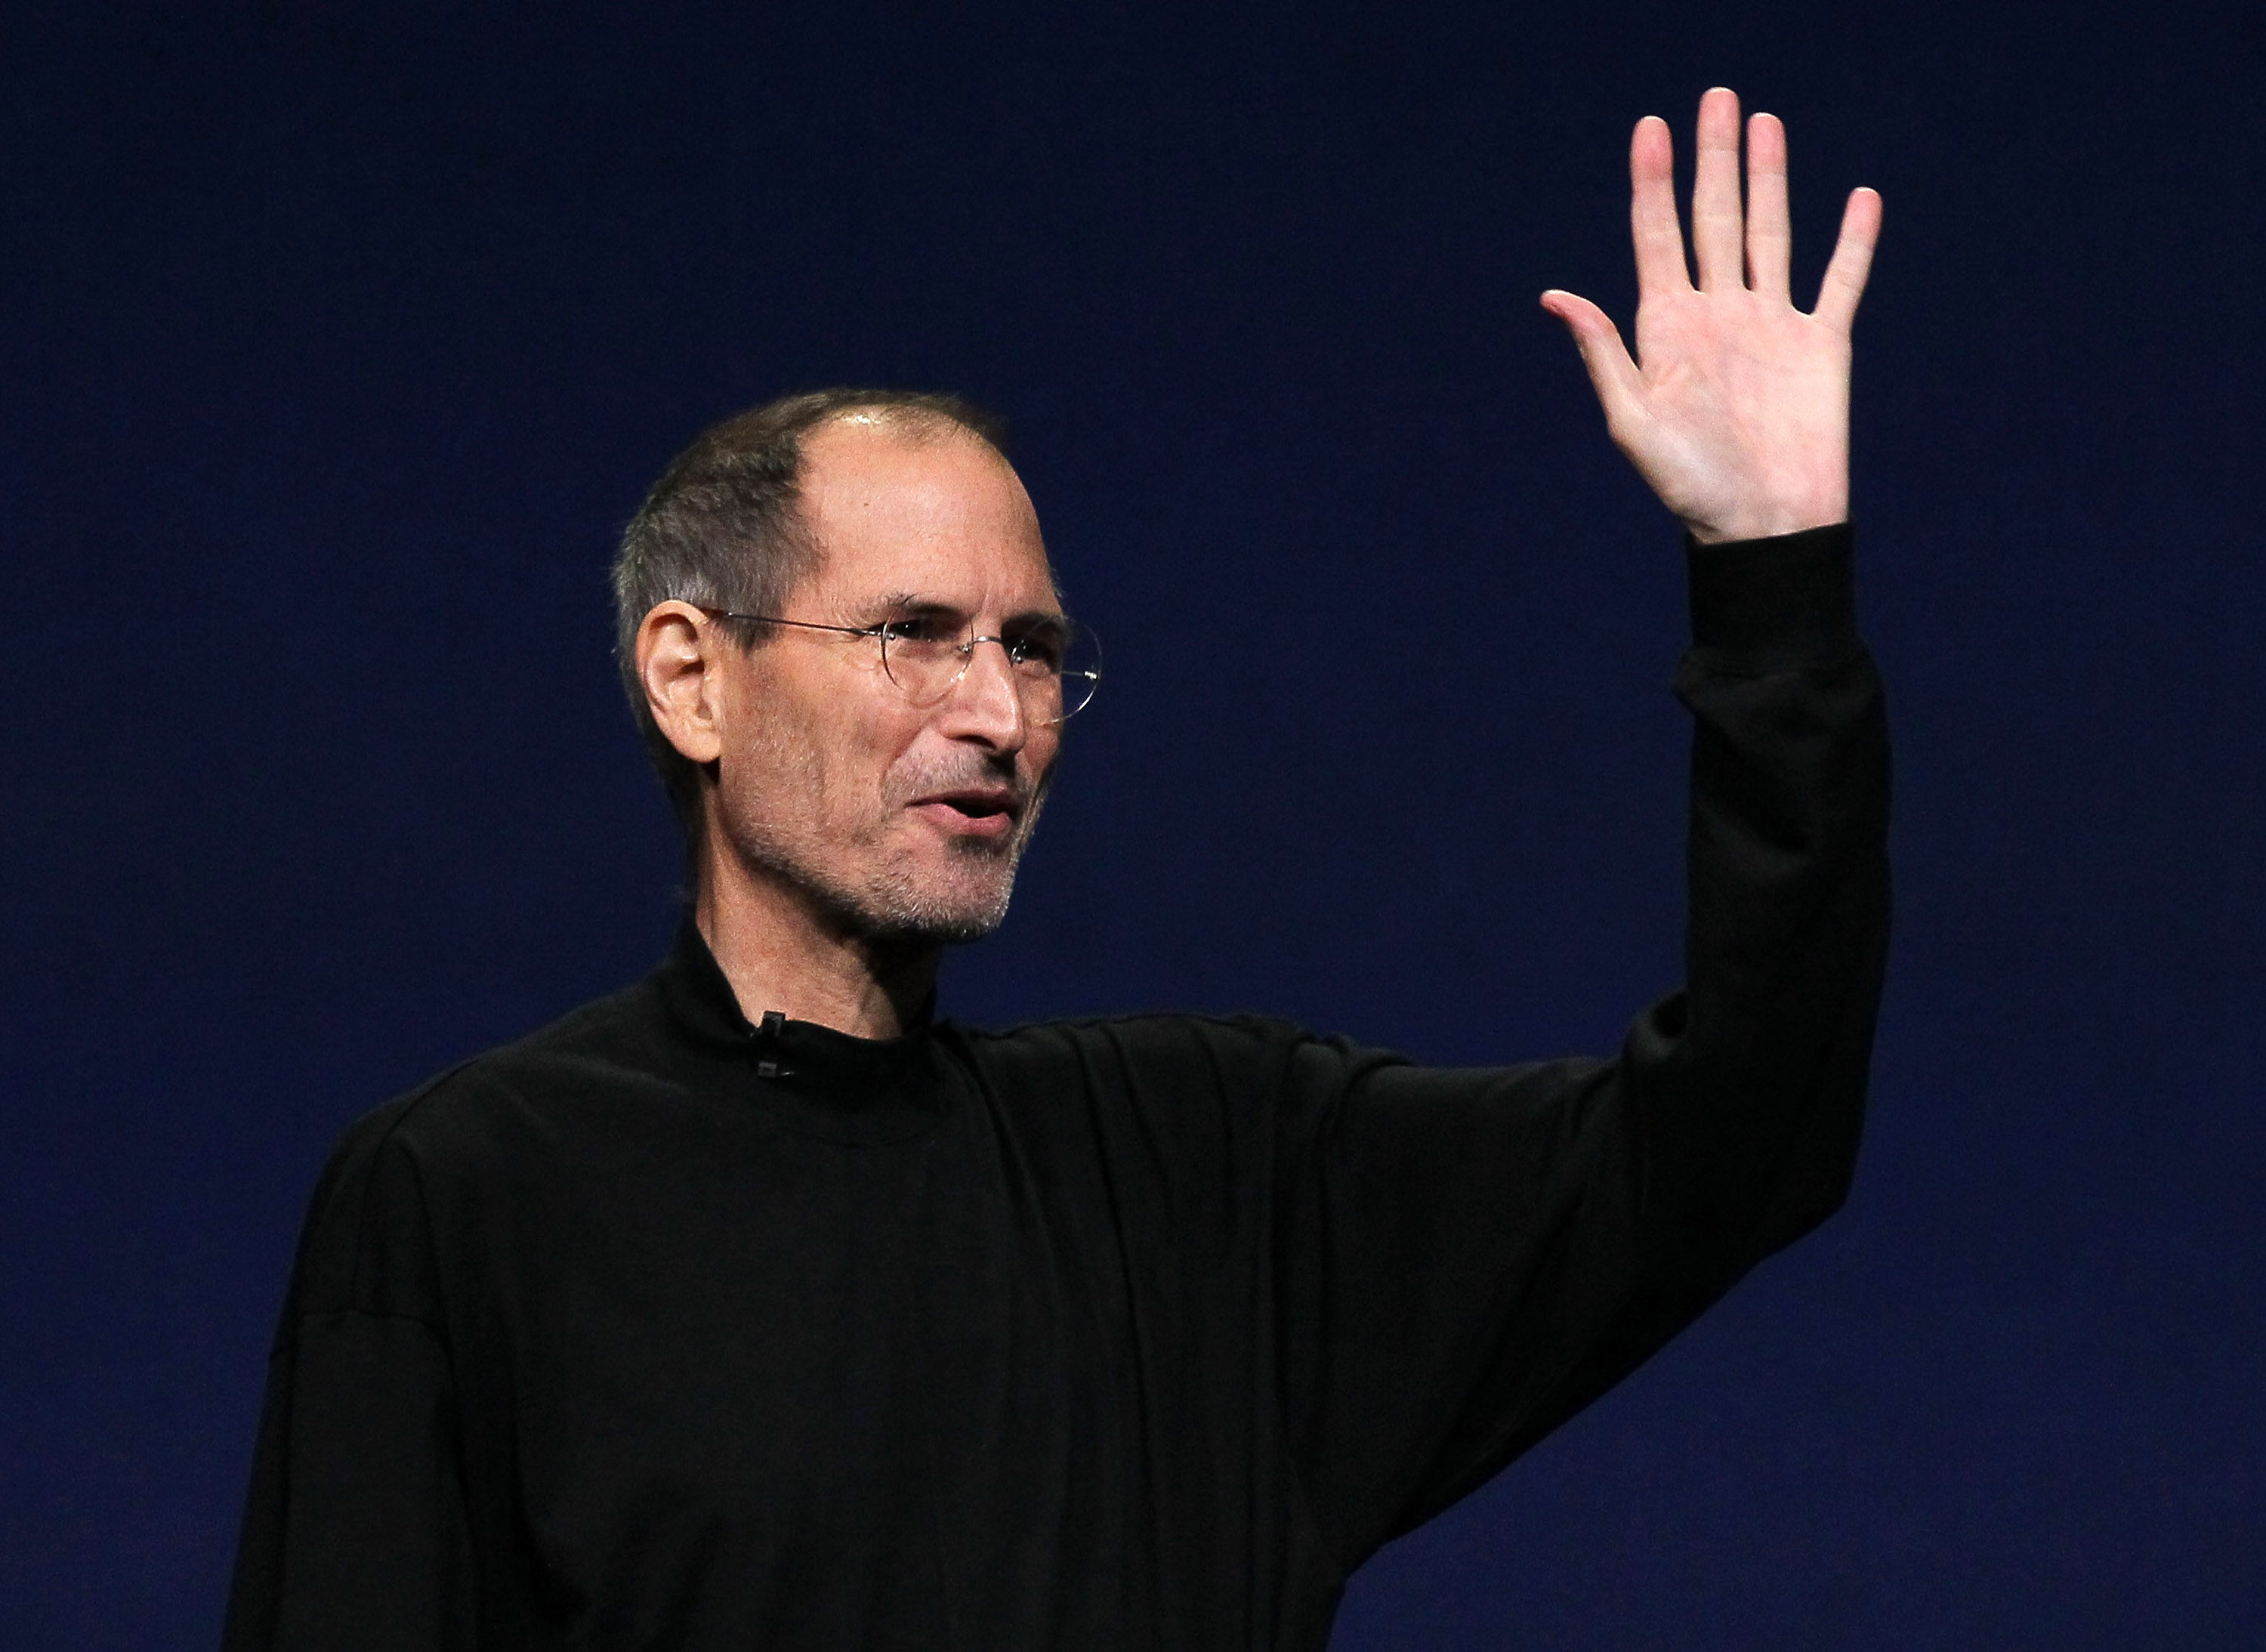 Steve Jobs Net Worth 5 Fast Facts You Need to Know